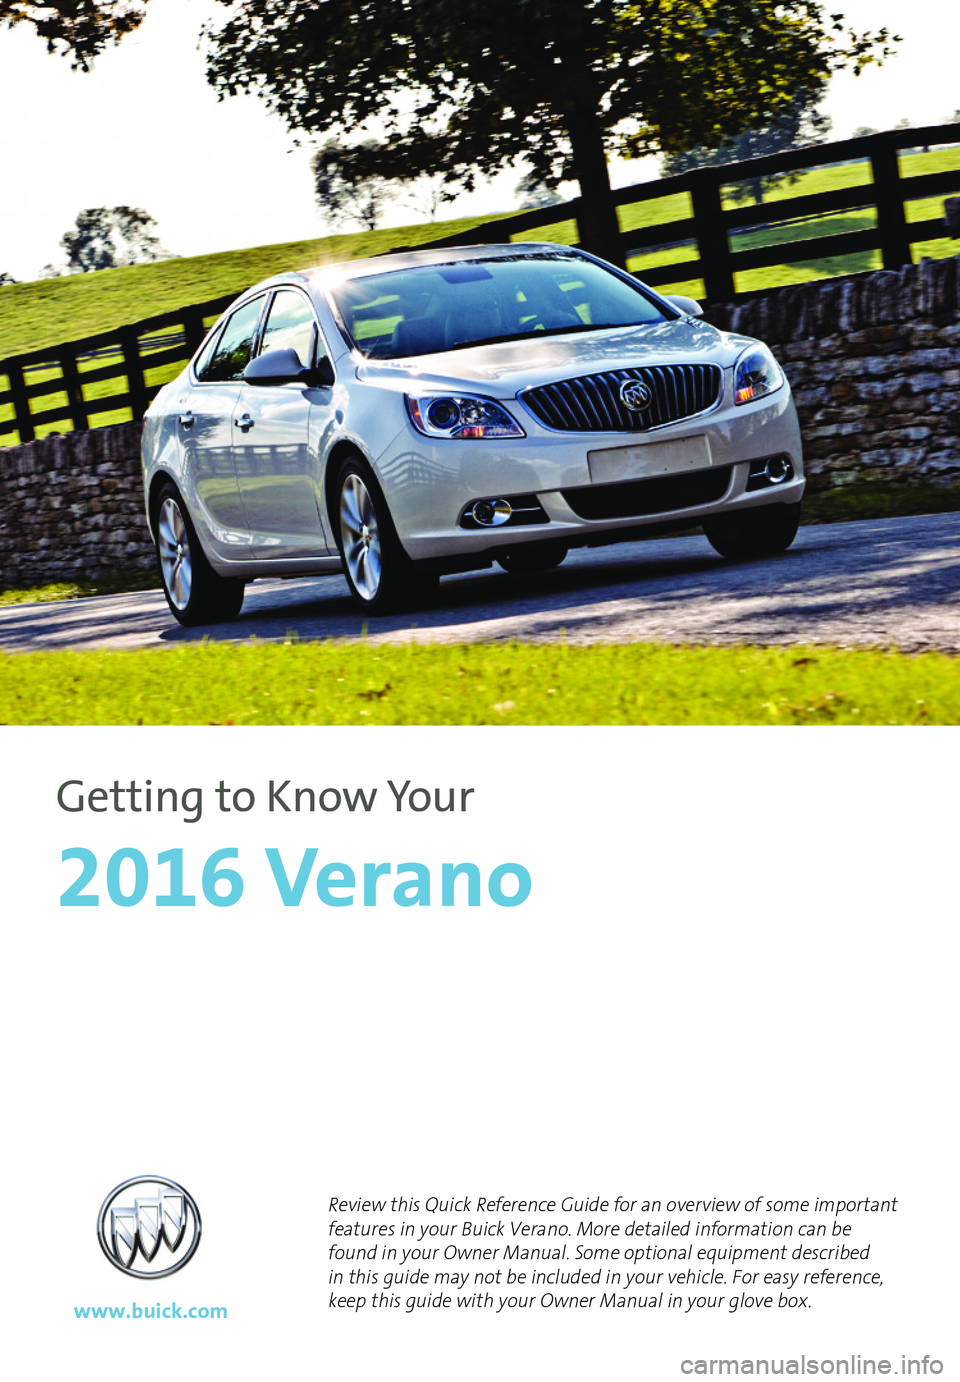 BUICK VERANO 2017  Get To Know Guide 1
Review this Quick Reference Guide for an overview of some important features in your Buick Verano. More detailed information can be found in your Owner Manual. Some optional equipment described in t